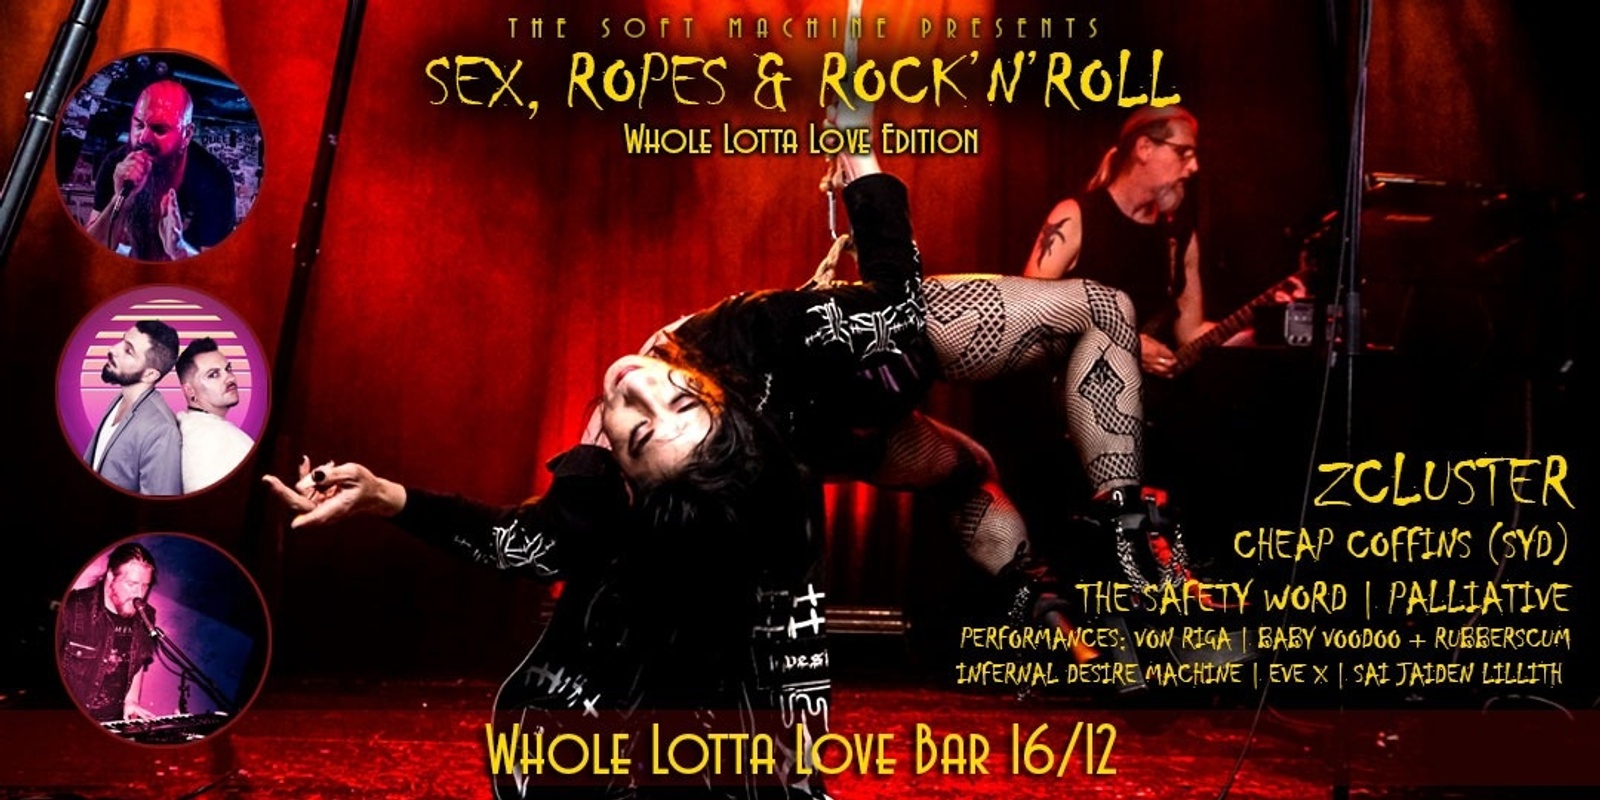 Banner image for Sex Ropes & Rock'n'Roll: Whole Lotta Love Edition - ZCLUSTER | CHEAP COFFINS (SYD) | THE SAFETY WORD | PALLIATIVE + Performers